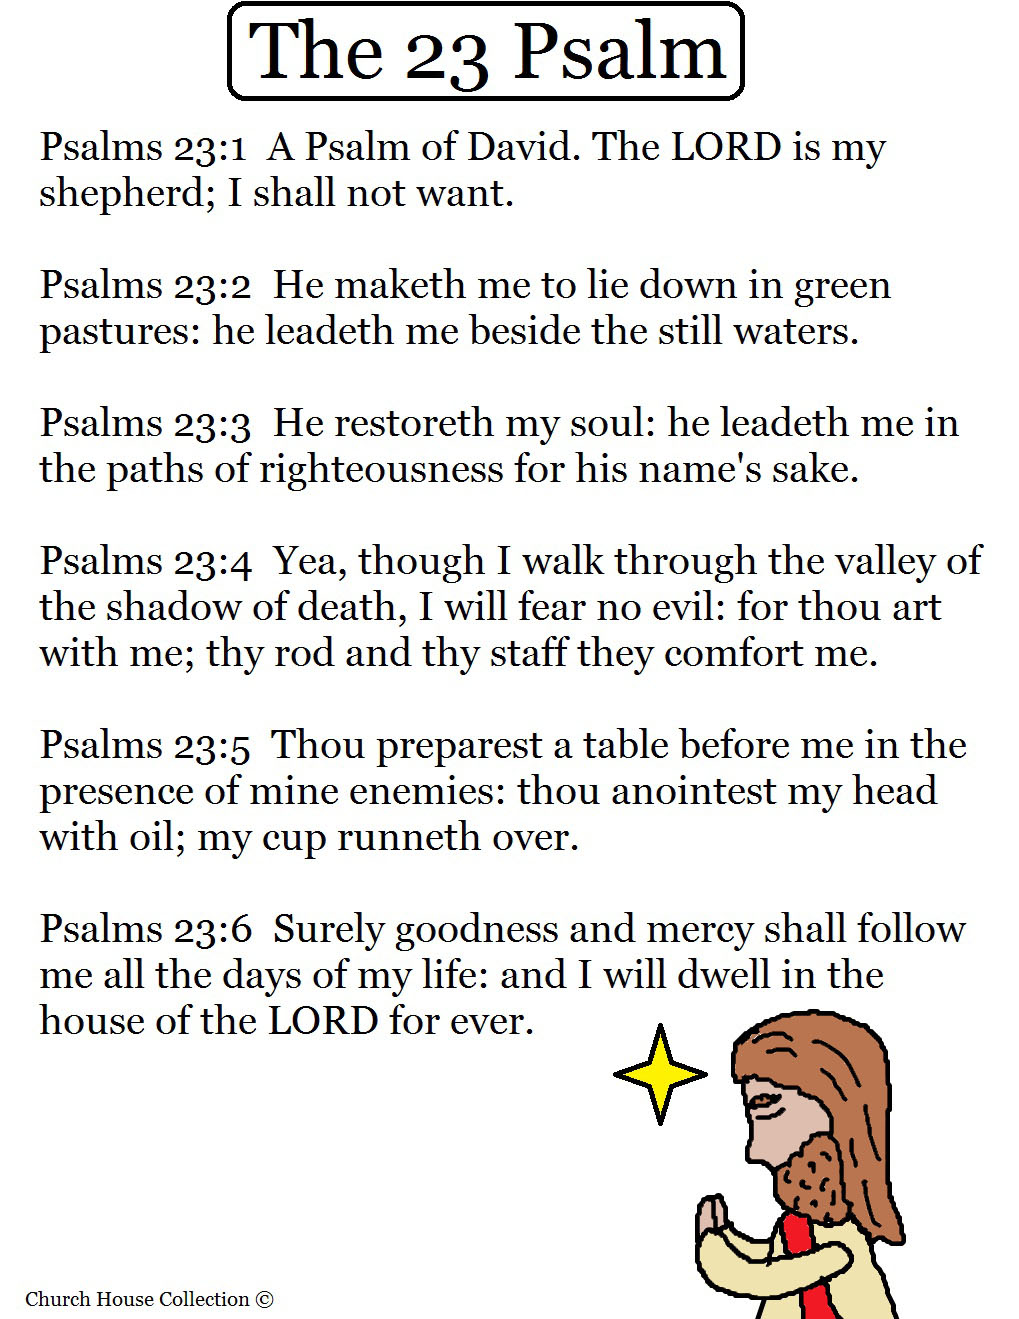 church-house-collection-blog-psalm-23-the-lord-is-my-shepherd-kjv